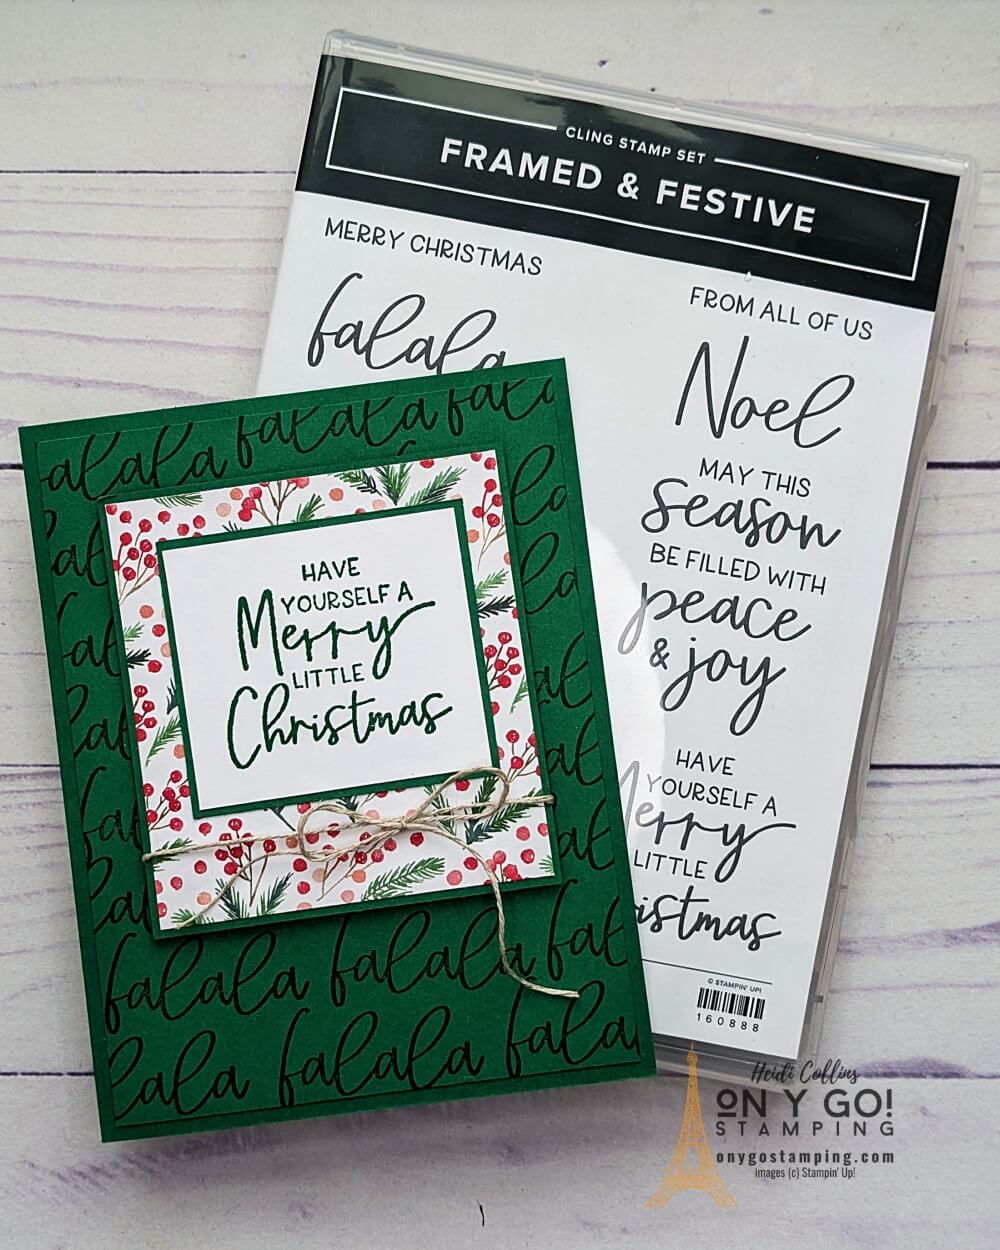 Create quick handmade Christmas cards with the Framed & Festive stamp set and Painted Christmas patterned paper from Stampin' Up!®